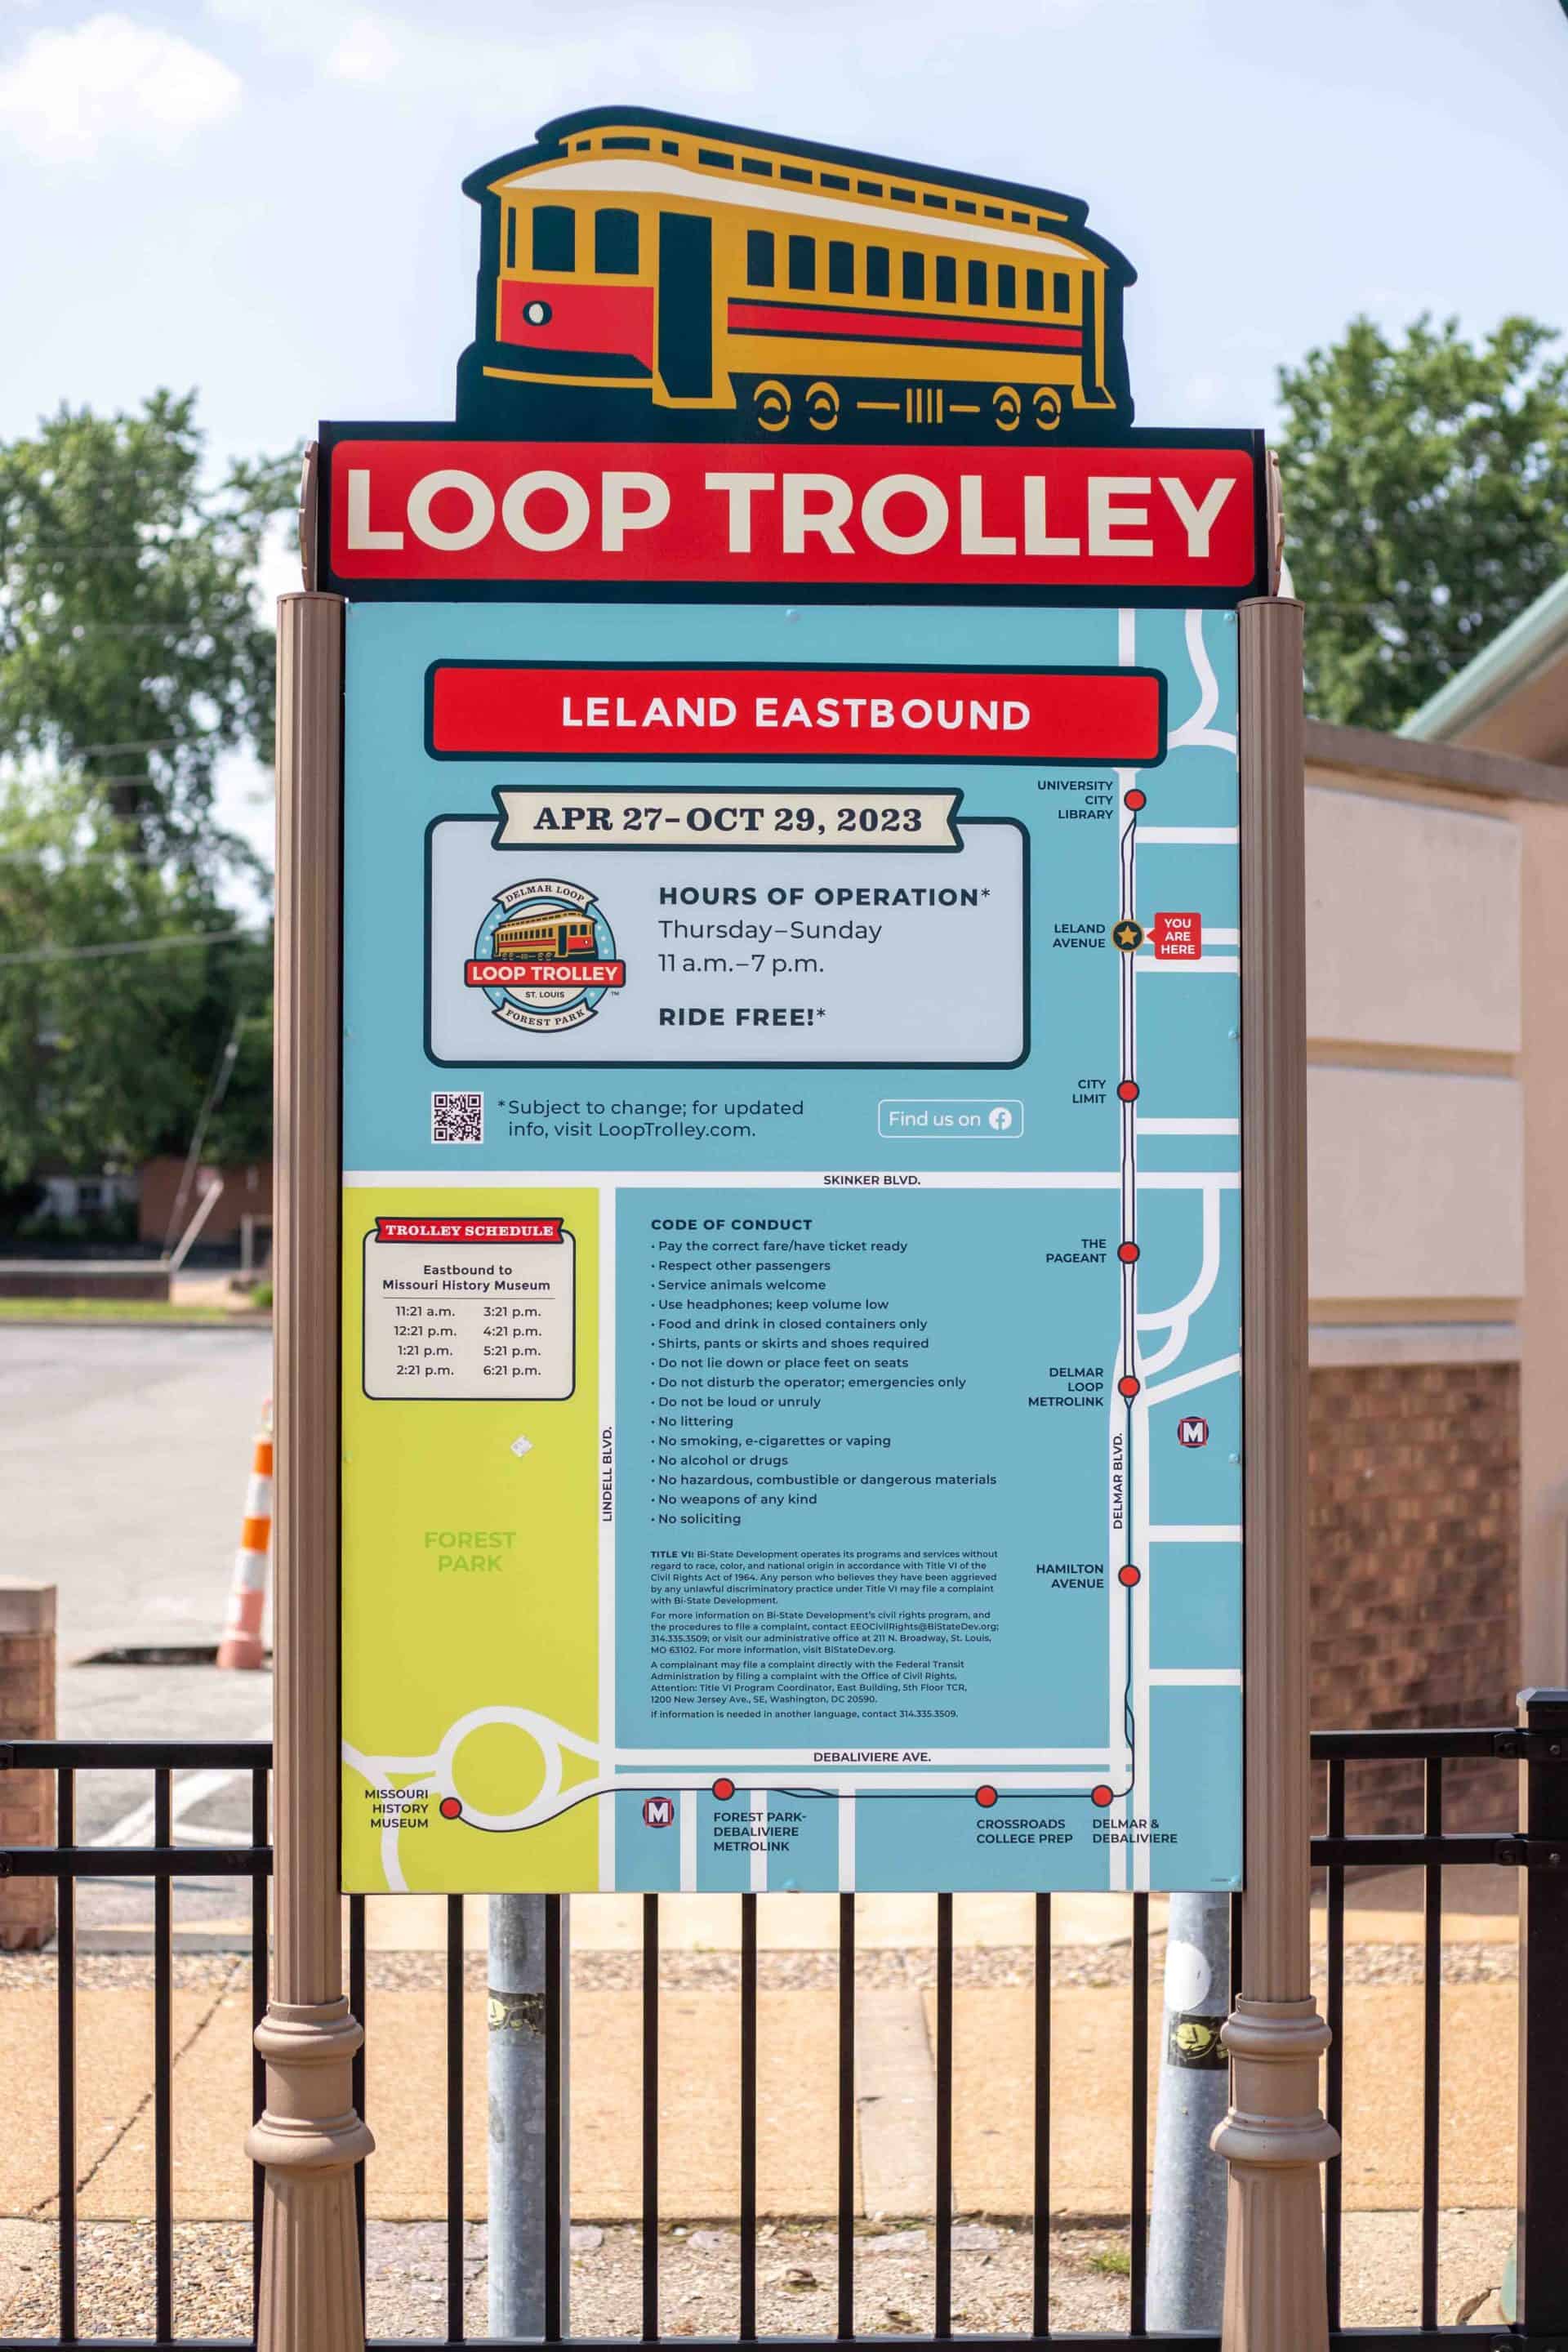 Loop Trolley educational sign with trolley map and historical information about the trolley